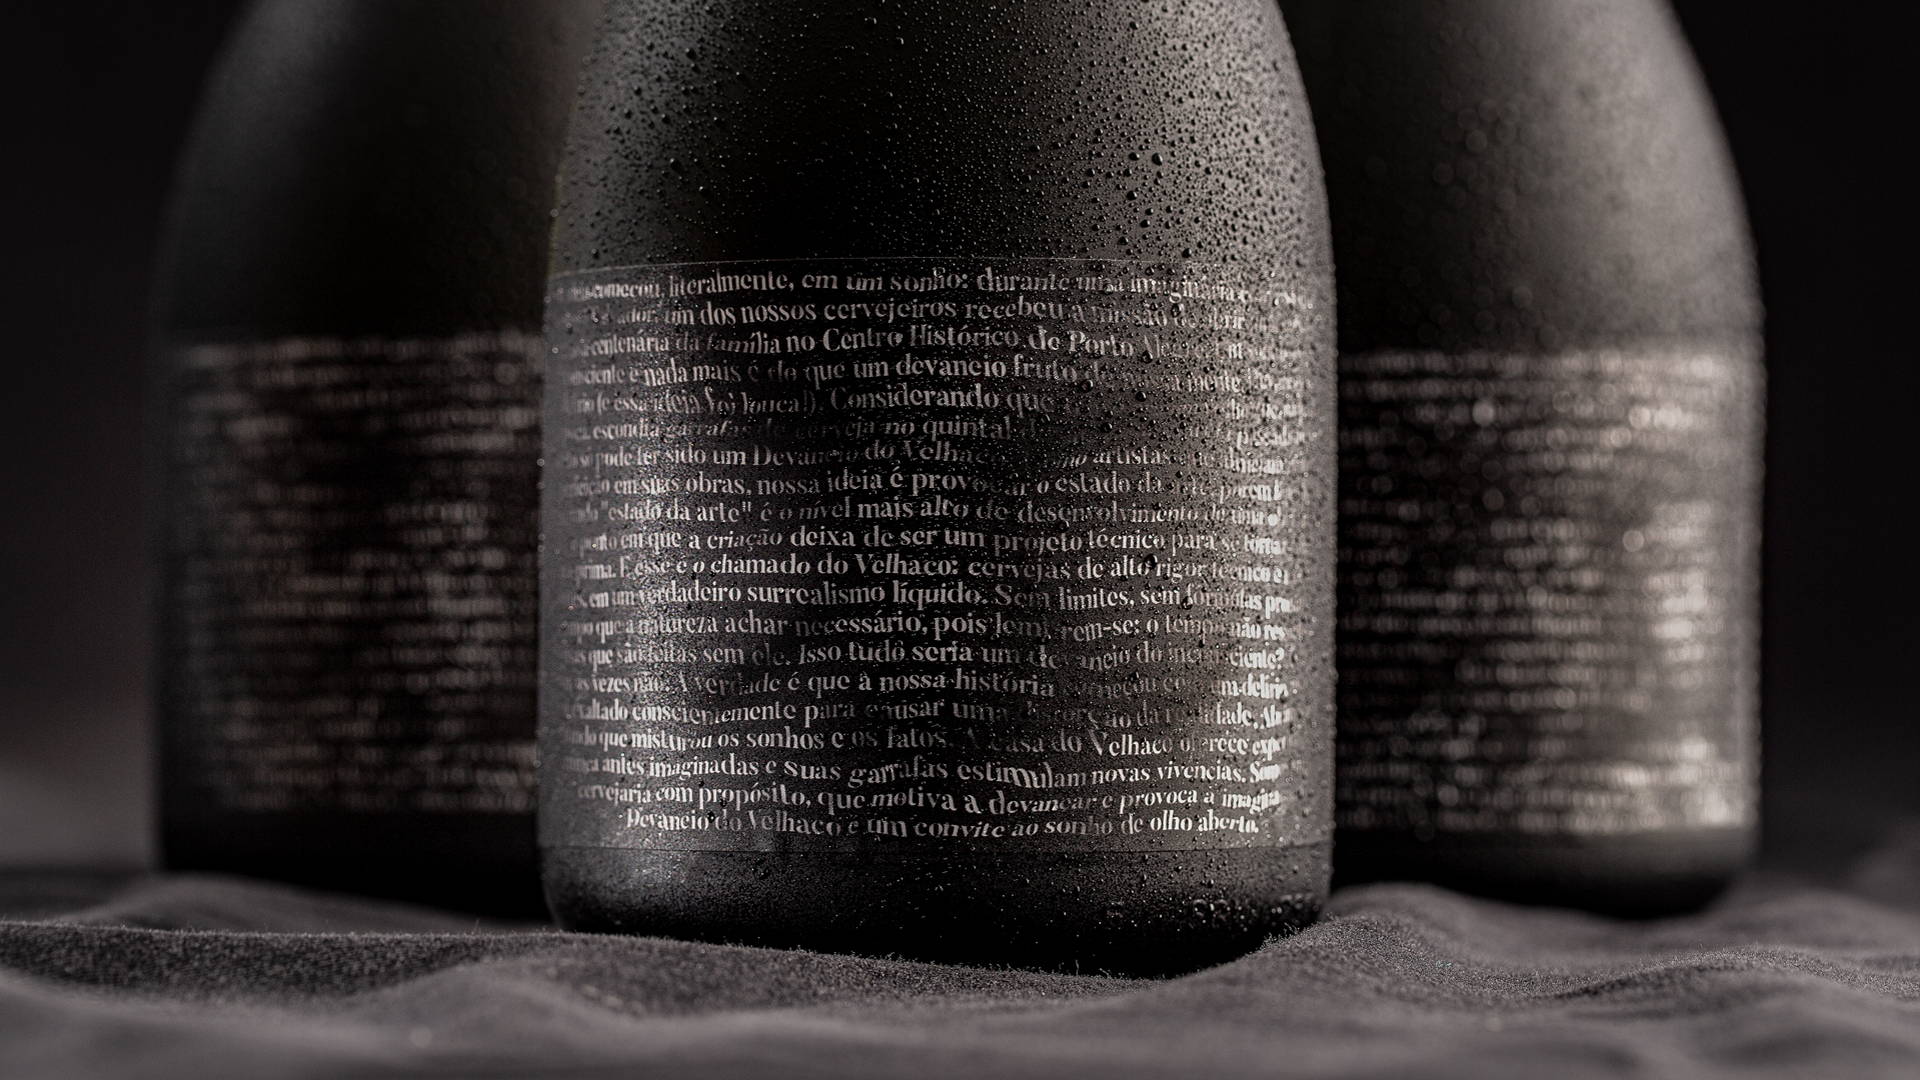 Featured image for This Beer Label Plays With Typography In Order to Create a Mysterious, Eye-Catching Look